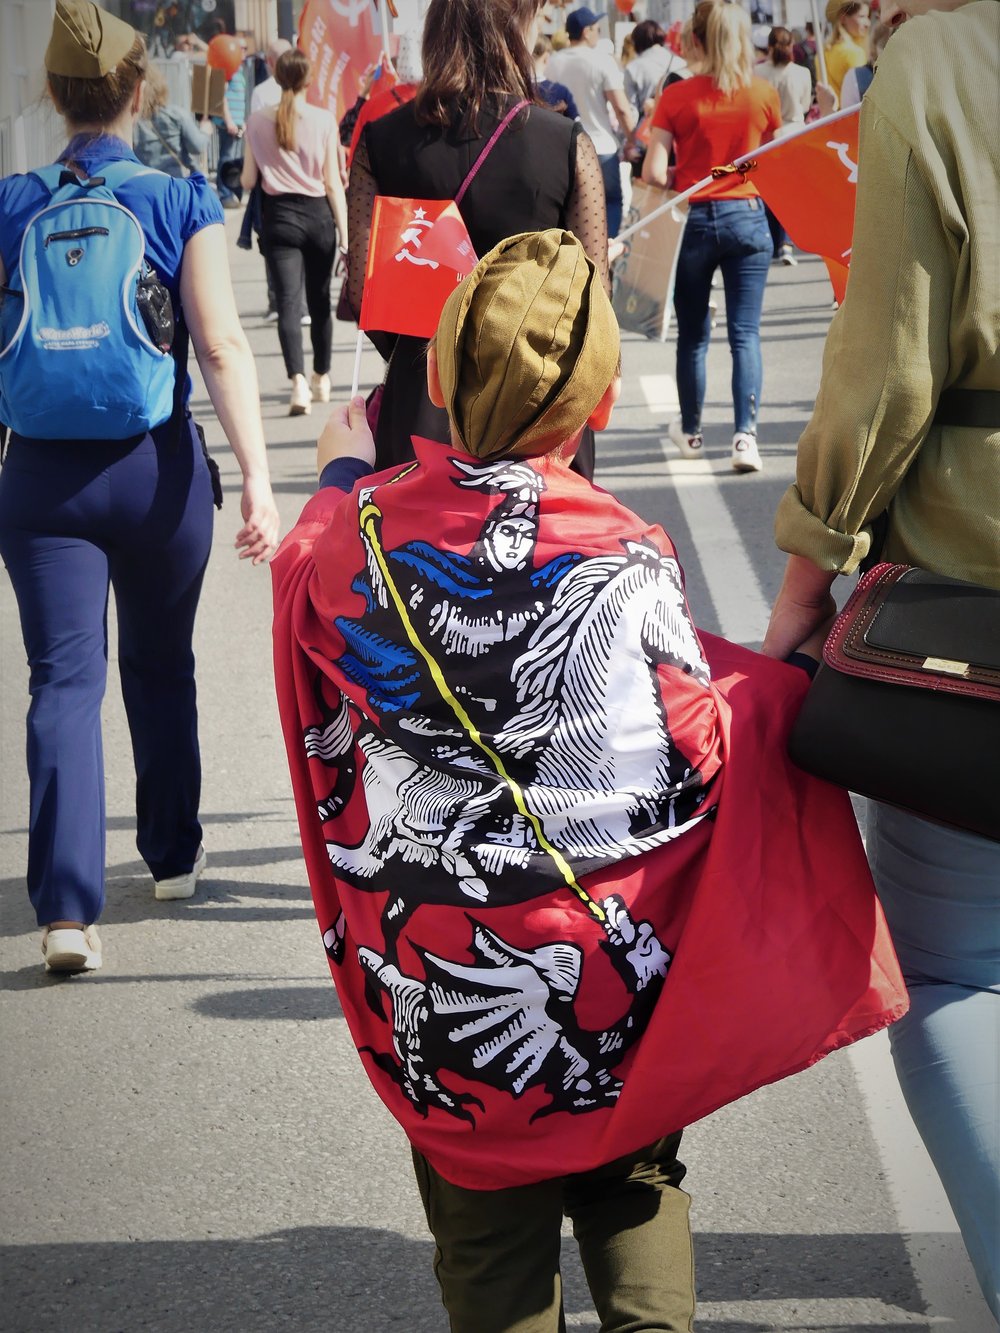  A little boy wrapped in a flag with Moscow’s coat of arms, featuring Saint George, waves a small Soviet flag. 